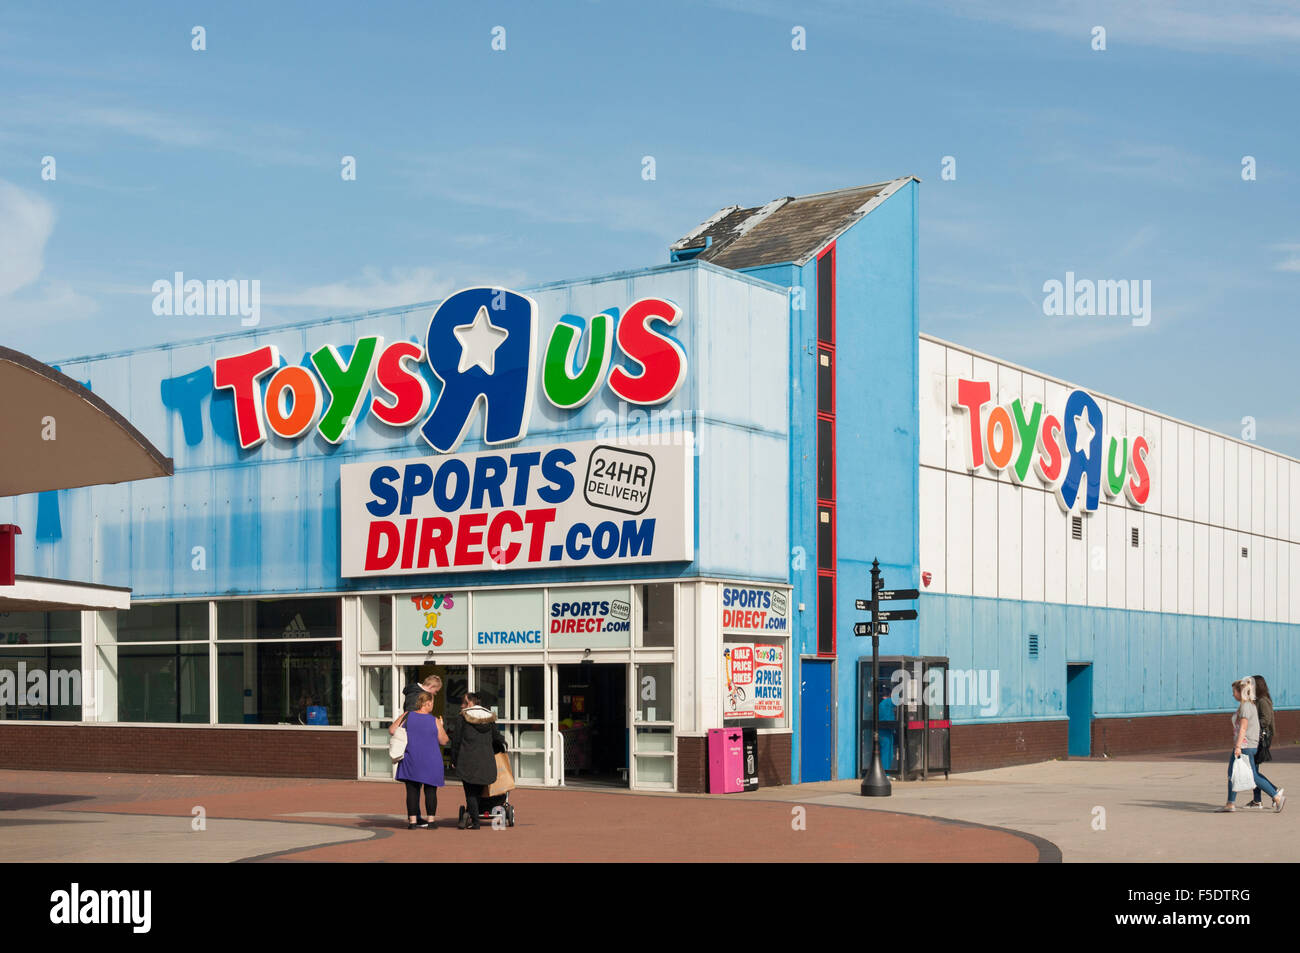 Toys R Us and Sports Direct store, Gardiners Link, Basildon, Essex, England, United Kingdom Stock Photo